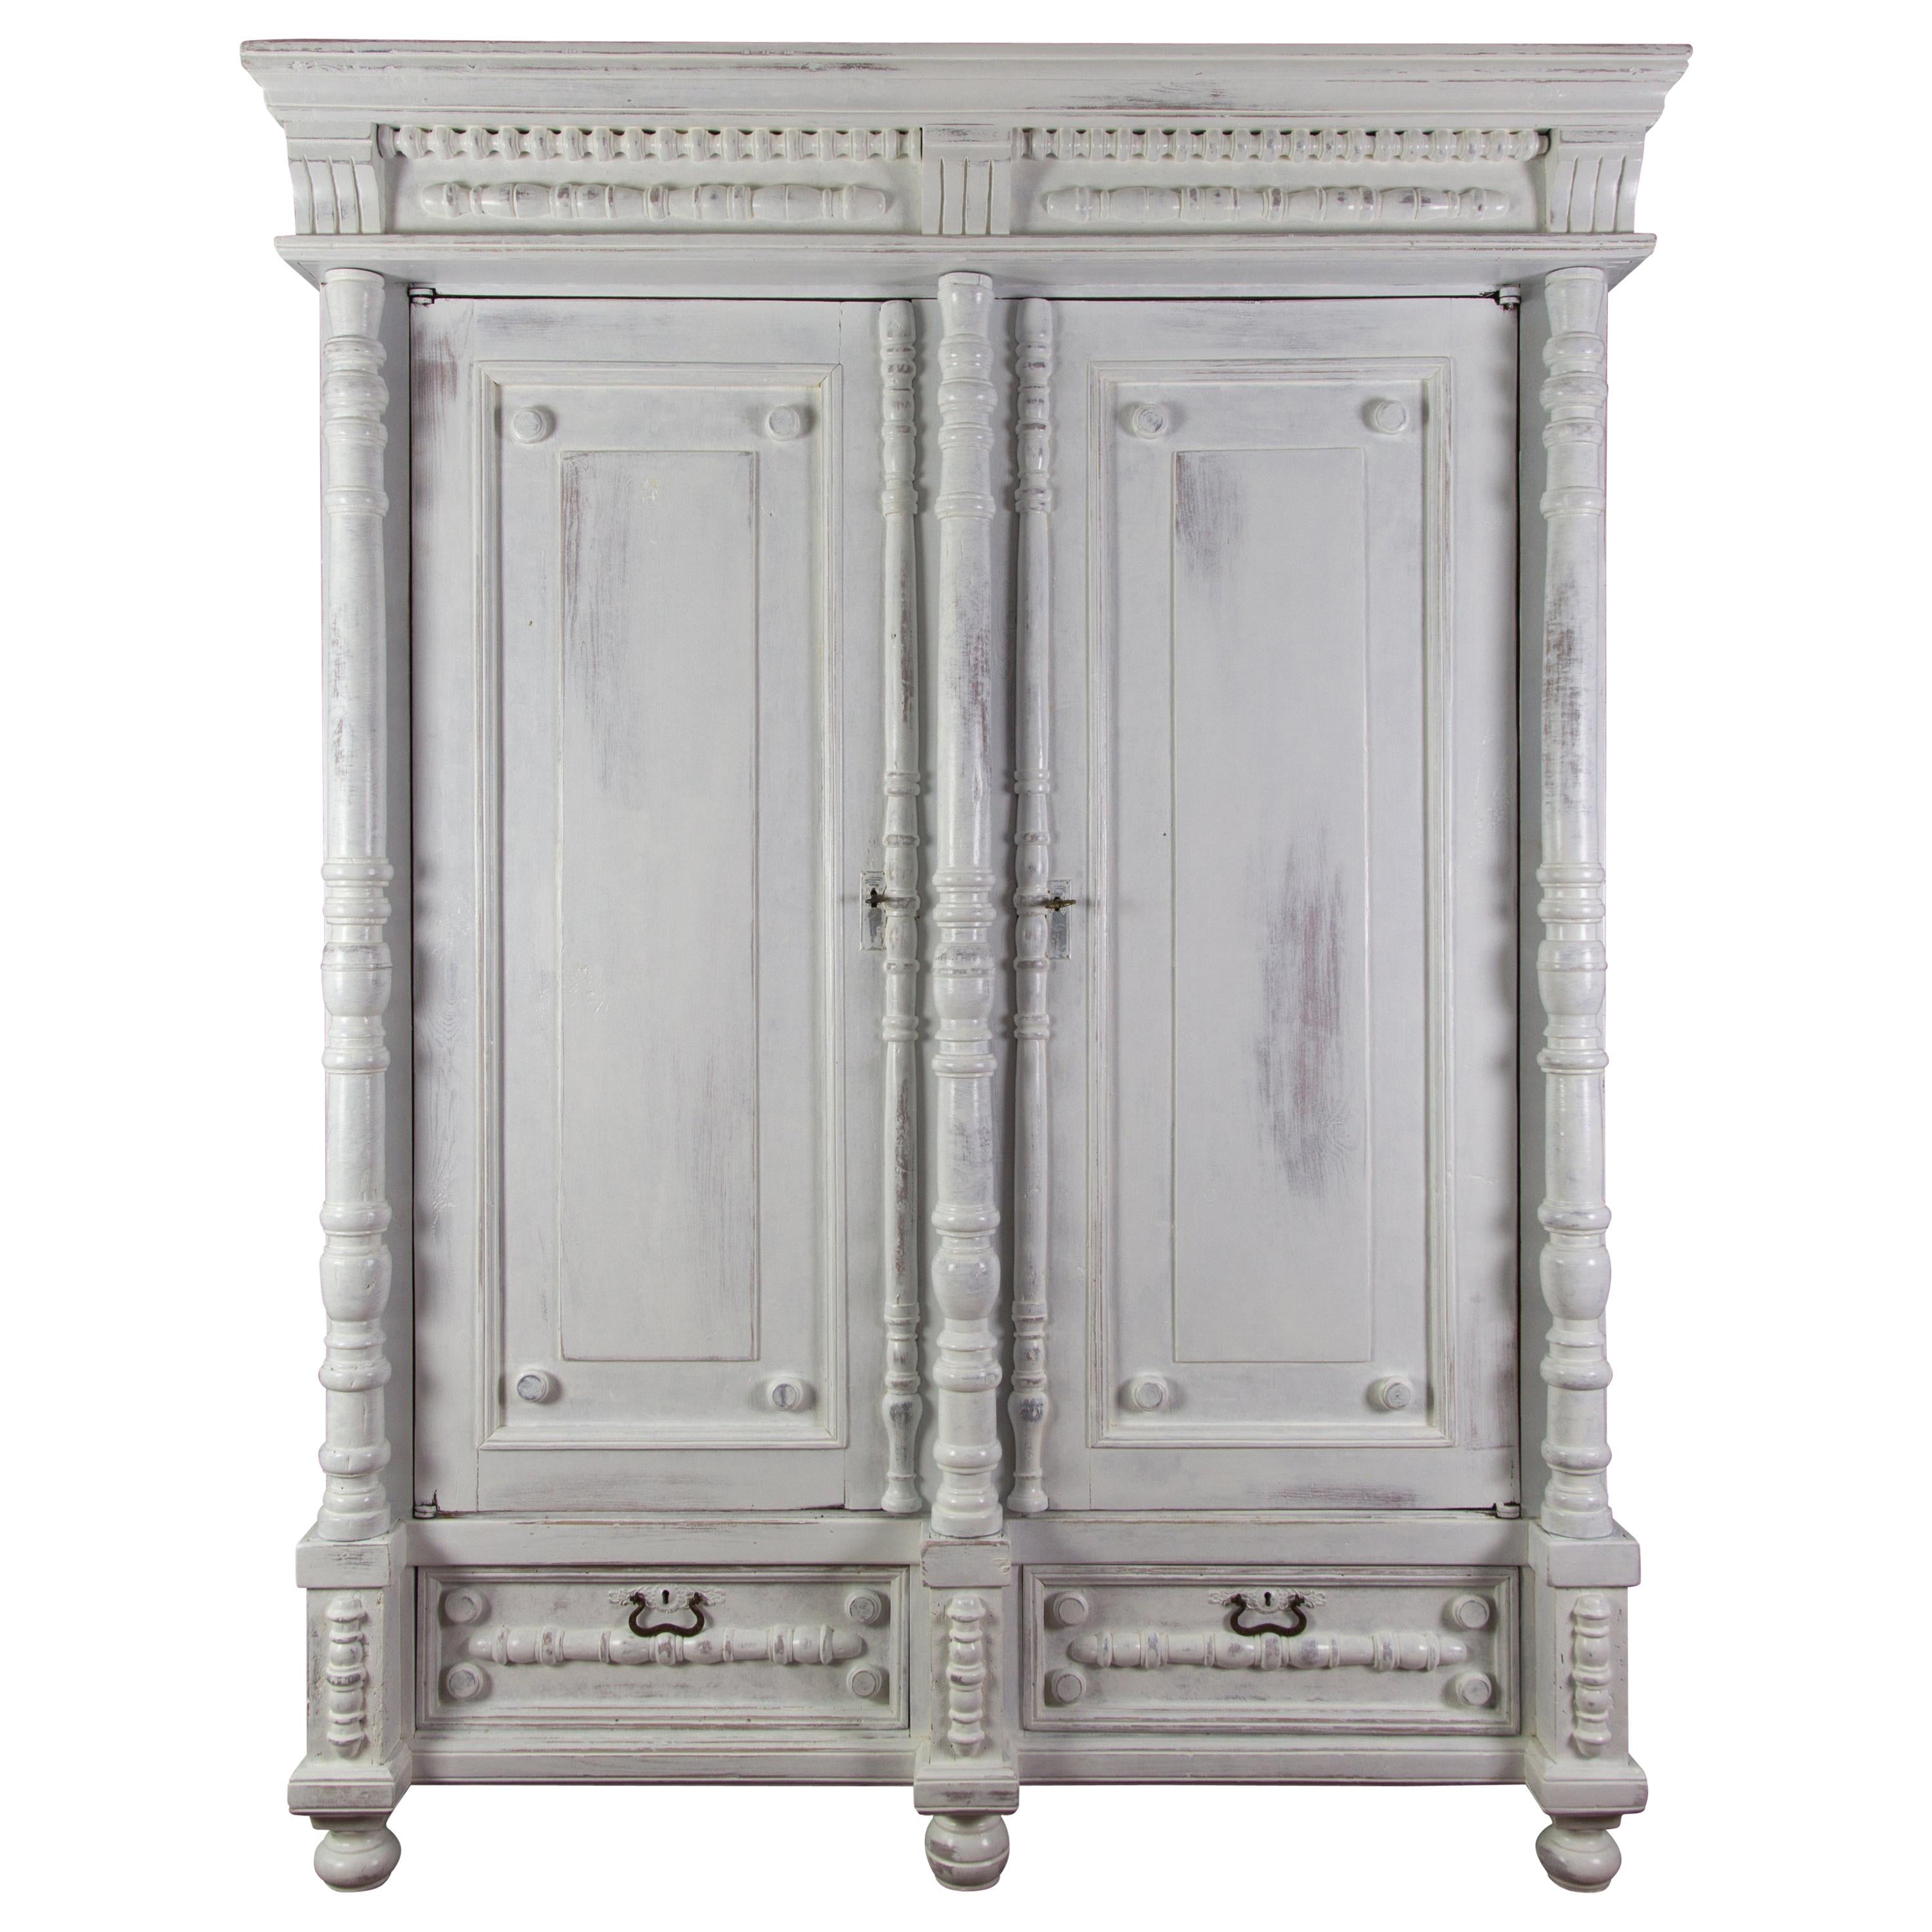 Early 20th Century Whitewashed Massive Baltic Pine Two-Door Armoire